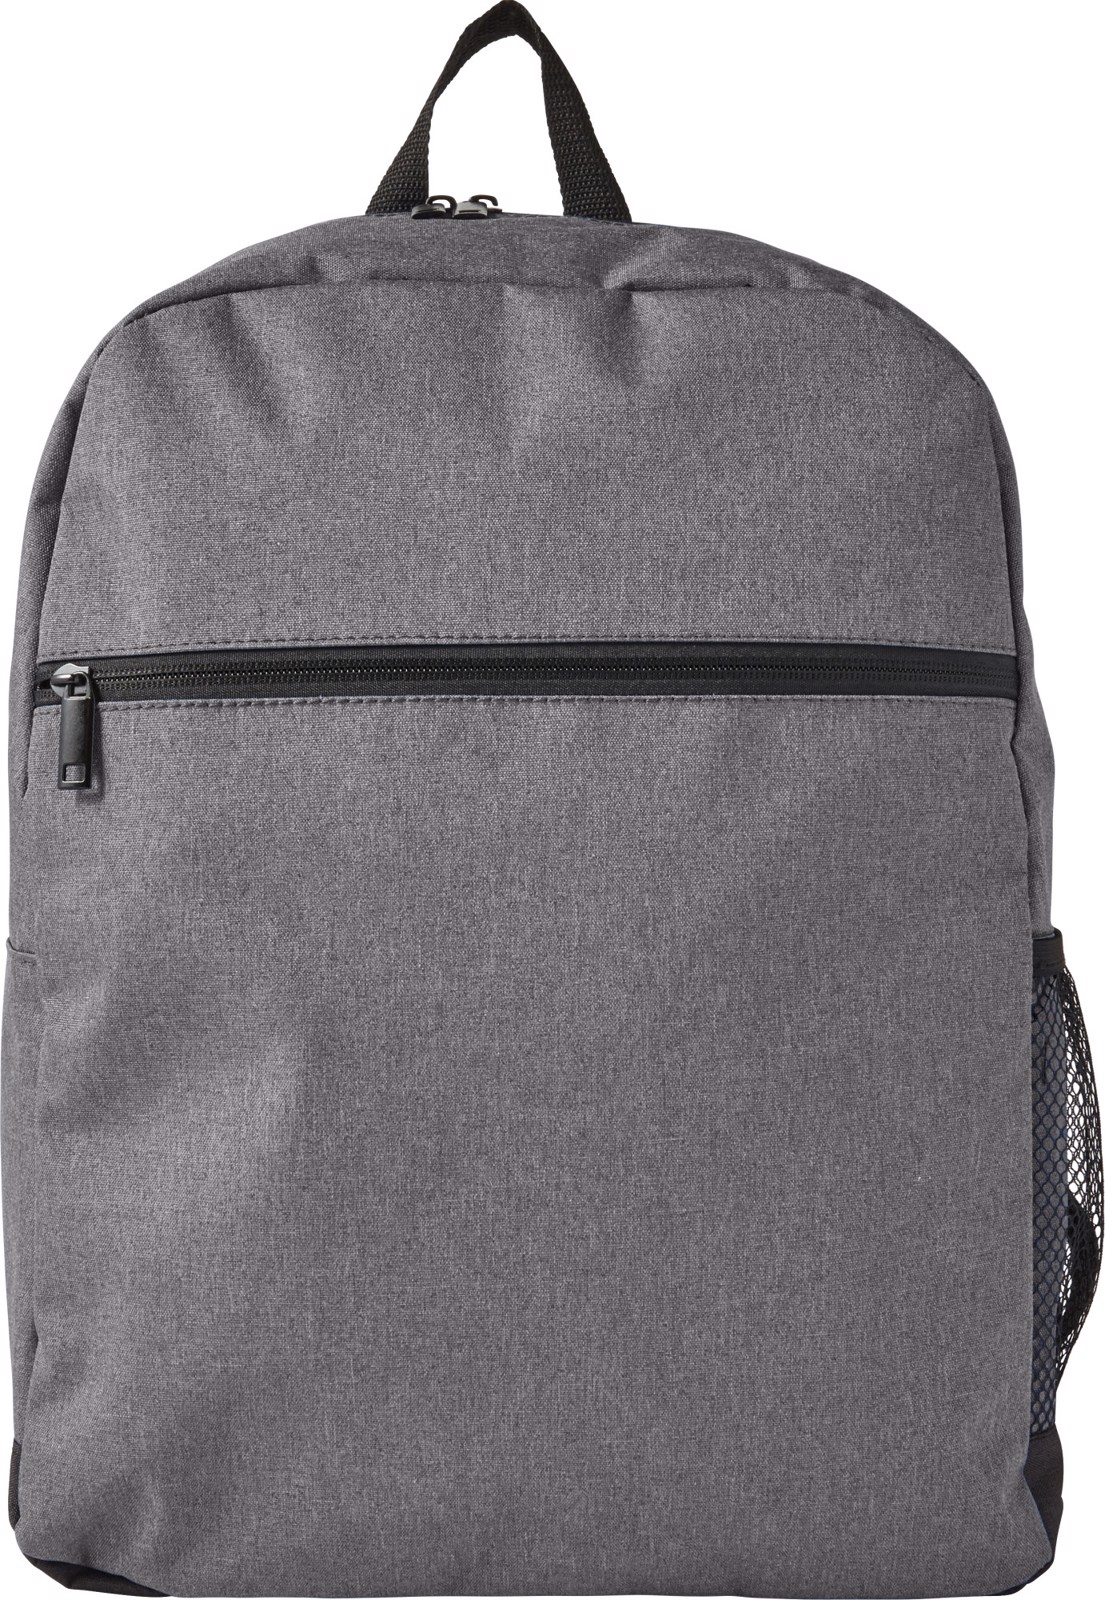 Polyester (300D) backpack - Grey